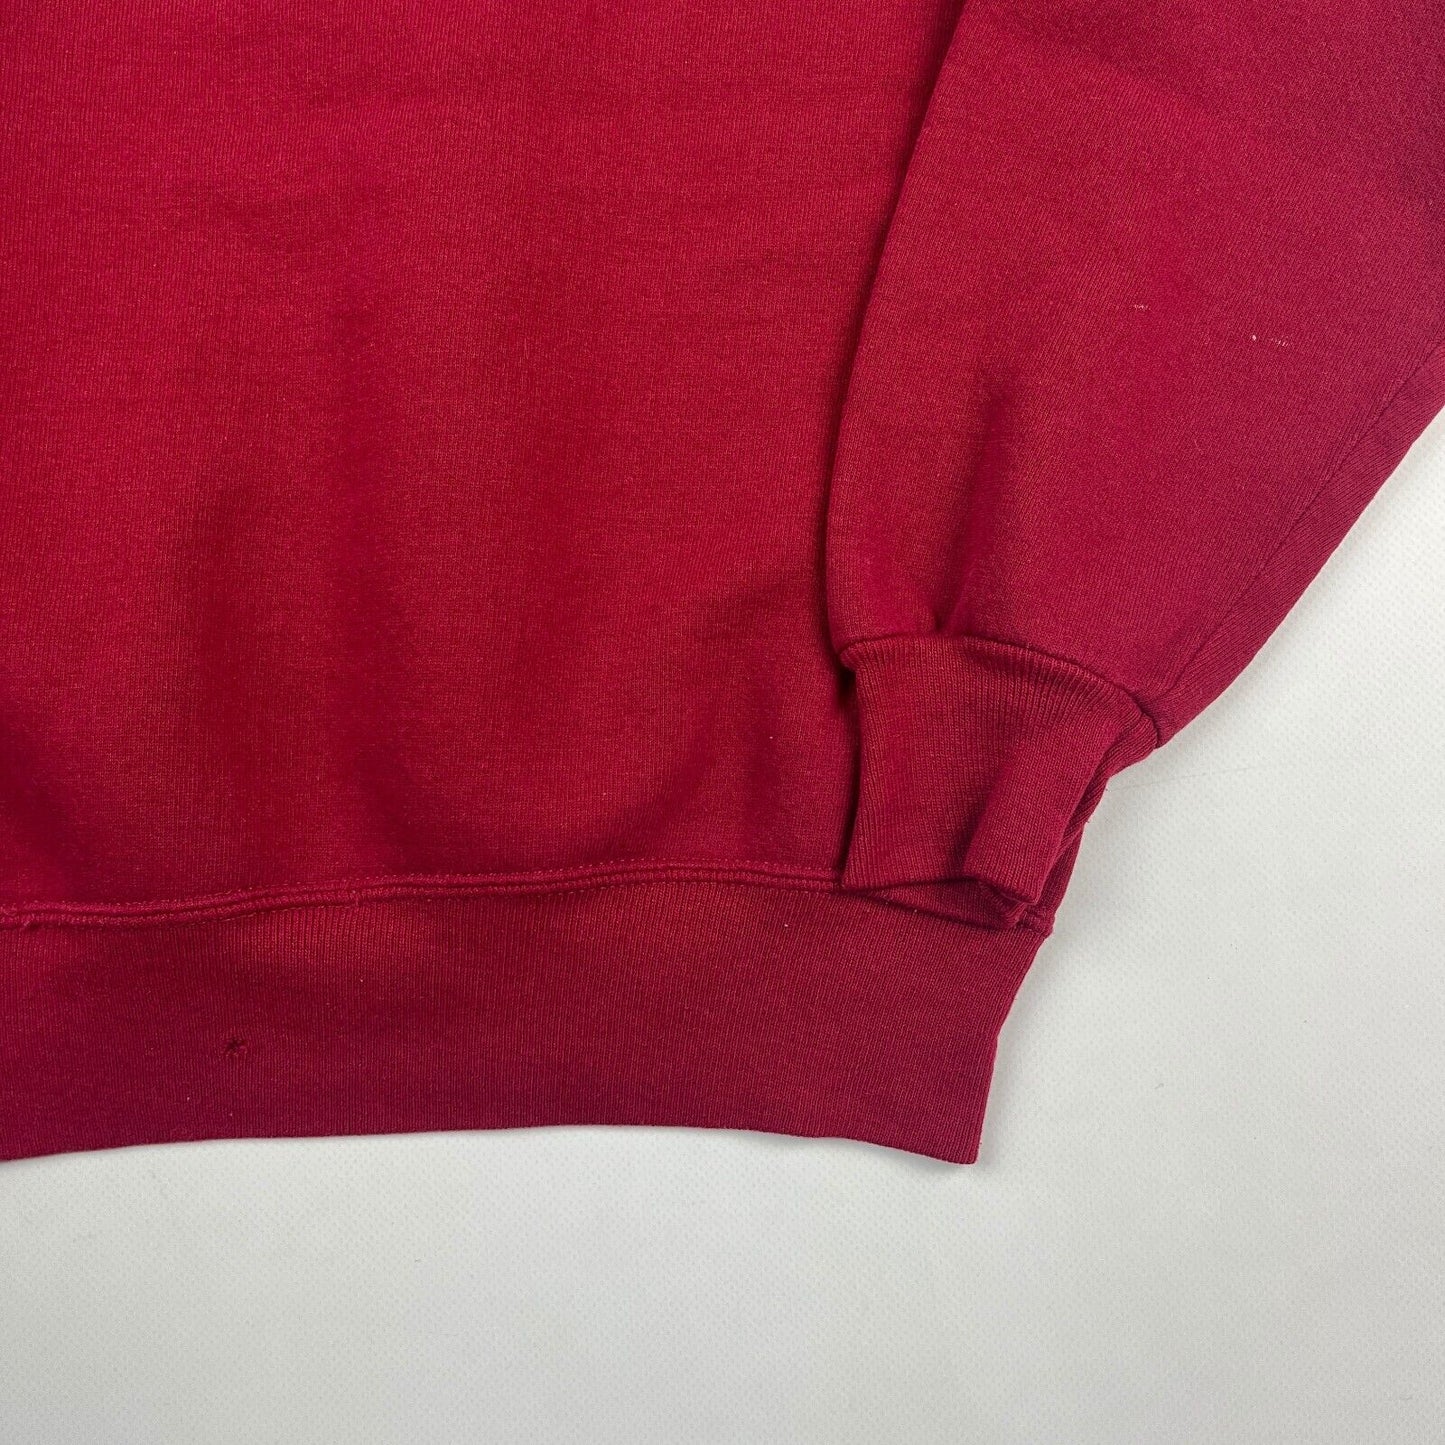 VINTAGE 90s Stanford Russell Athletic Red Crewneck Sweater sz Small Men